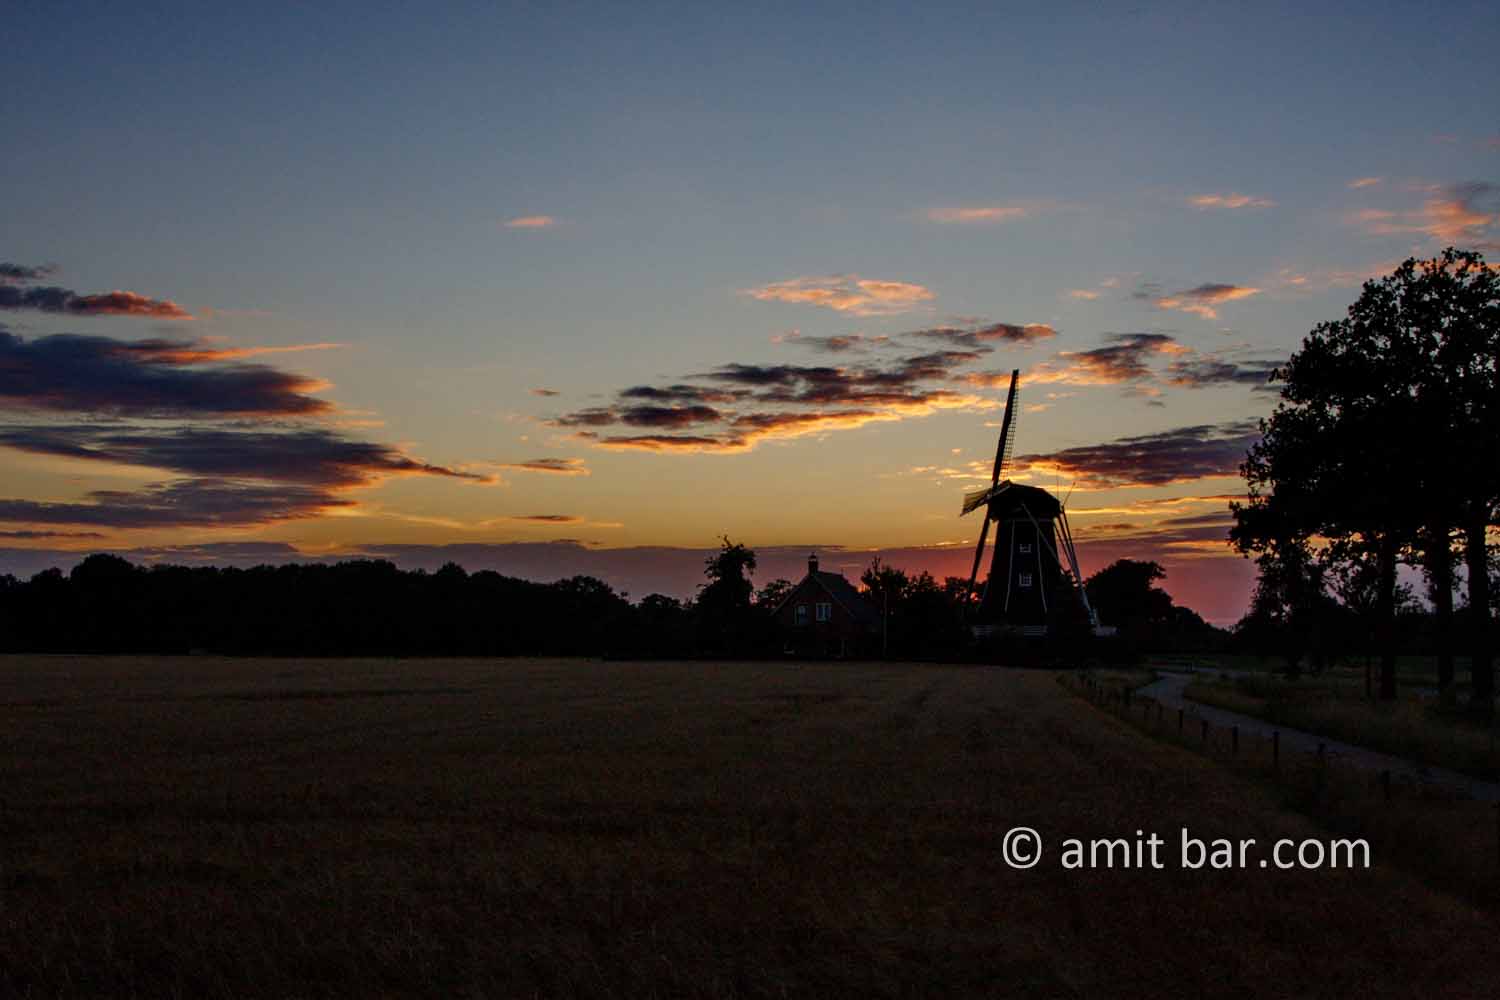 Windmill at sunset II: Windmill at sunset in Doetinchem, The Netherands